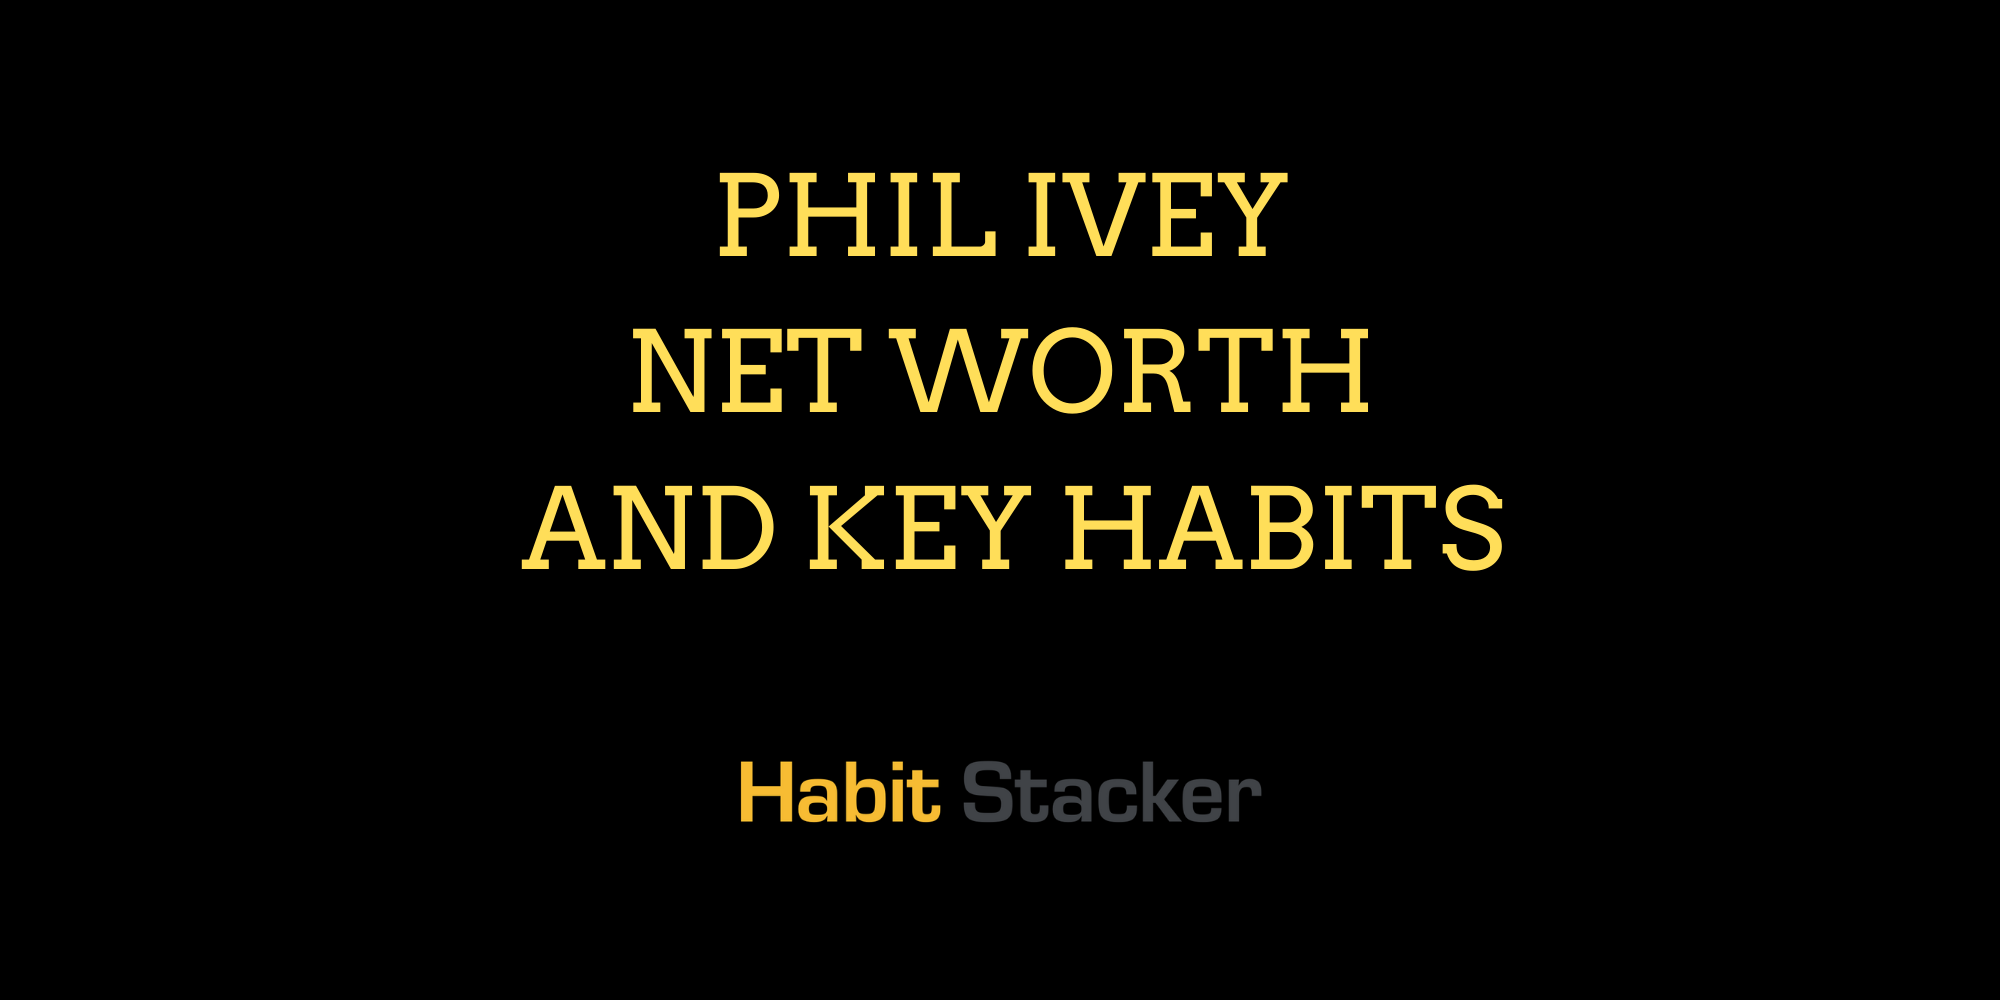 Phil Ivey Net Worth and Key Habits